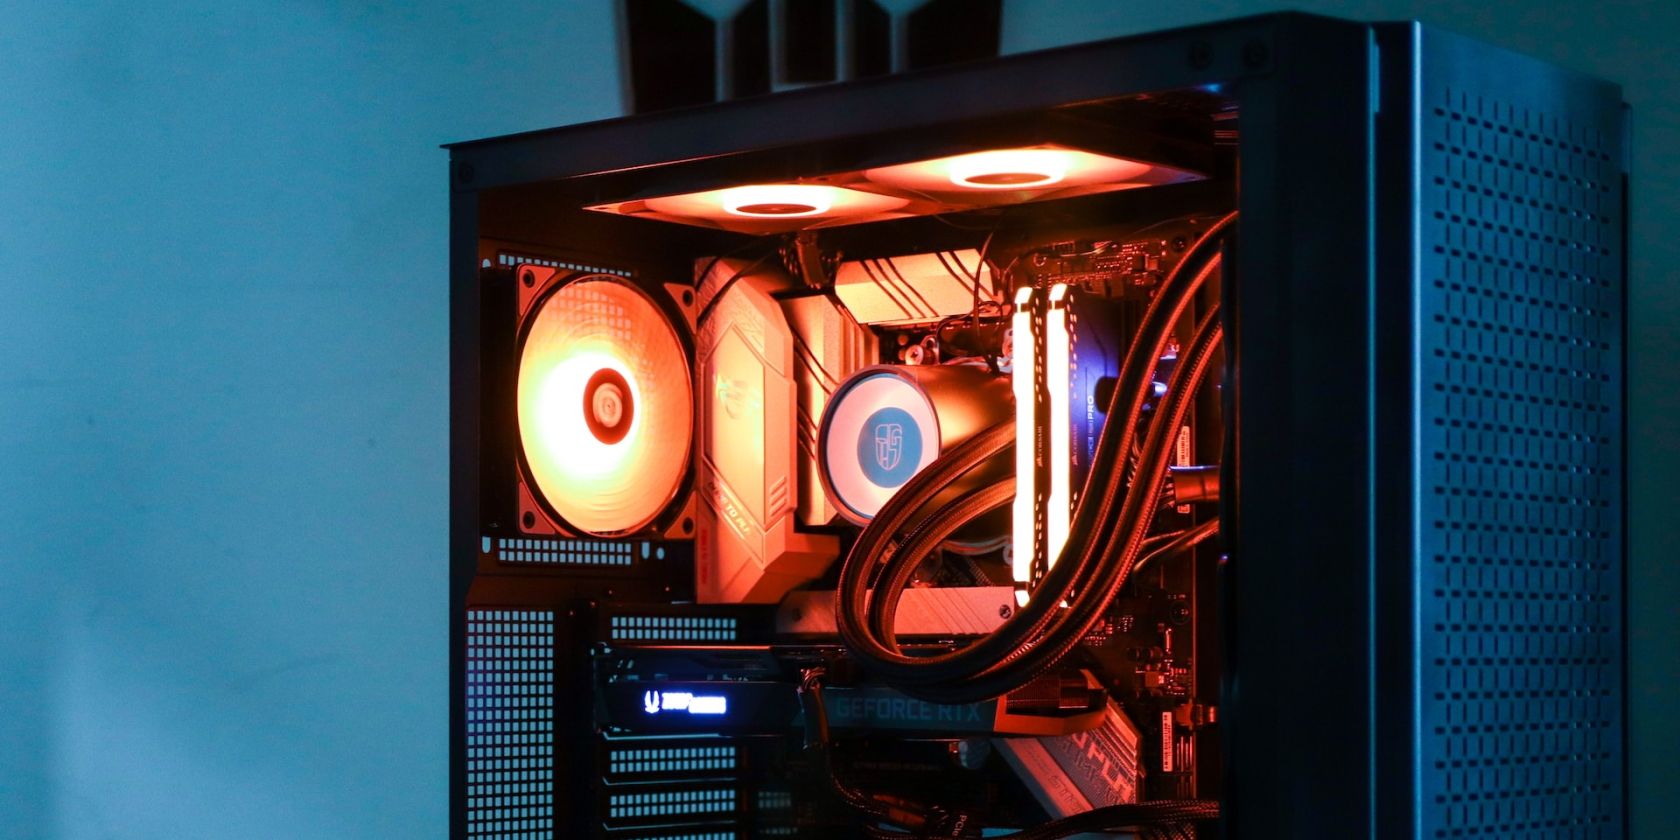 liquid cooled gaming PC build with RGB lighting